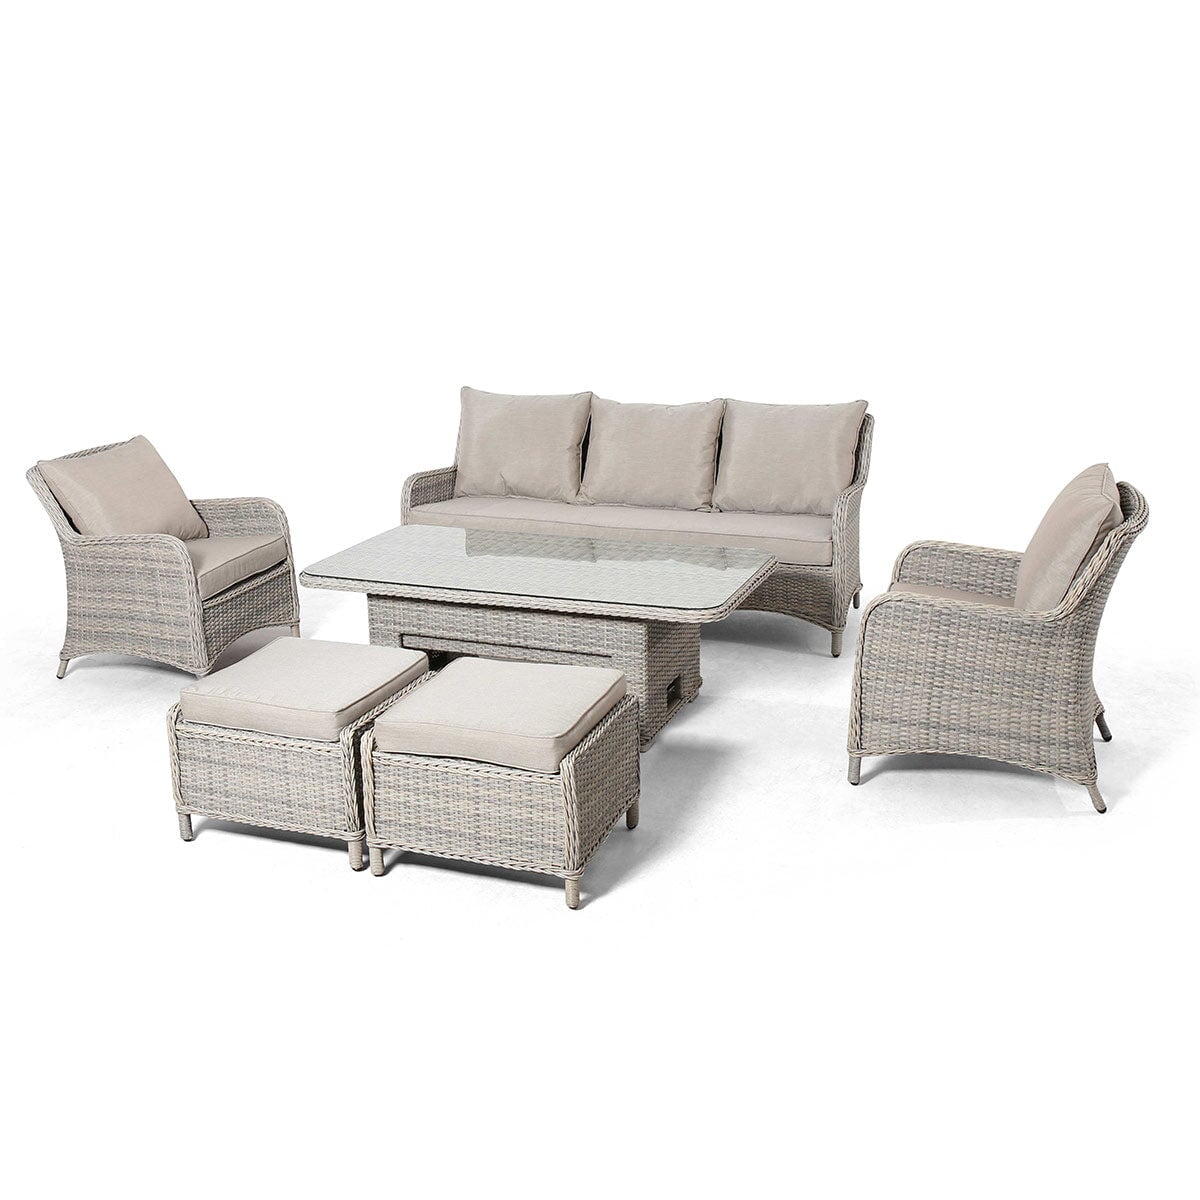 Cotswold 3 Seat Sofa Dining with Rising Table | Grey/Taupe